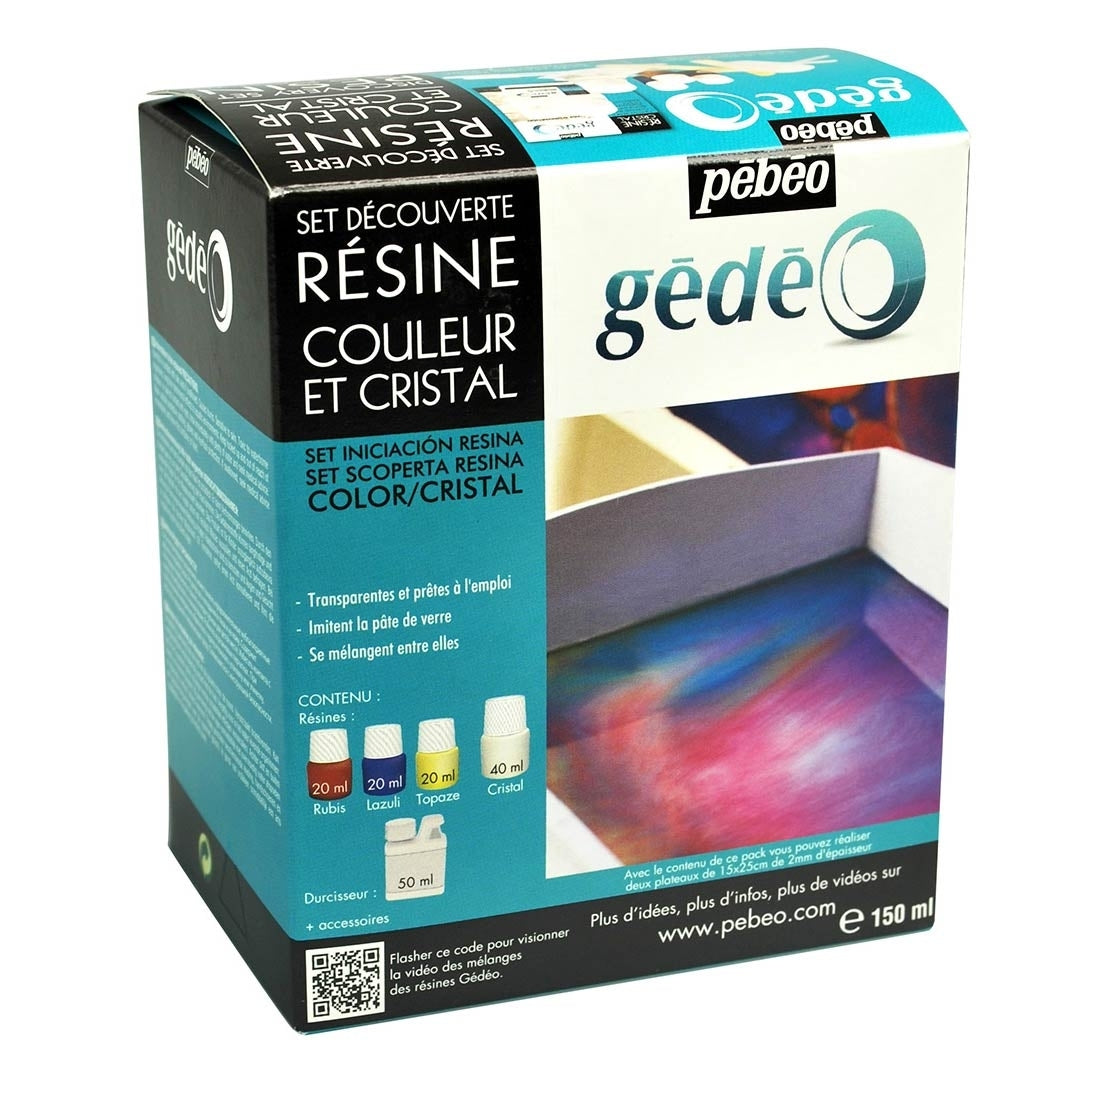 Pebeo - Molding and casting - Gedeo Resin Discovery Kit - Astorteded